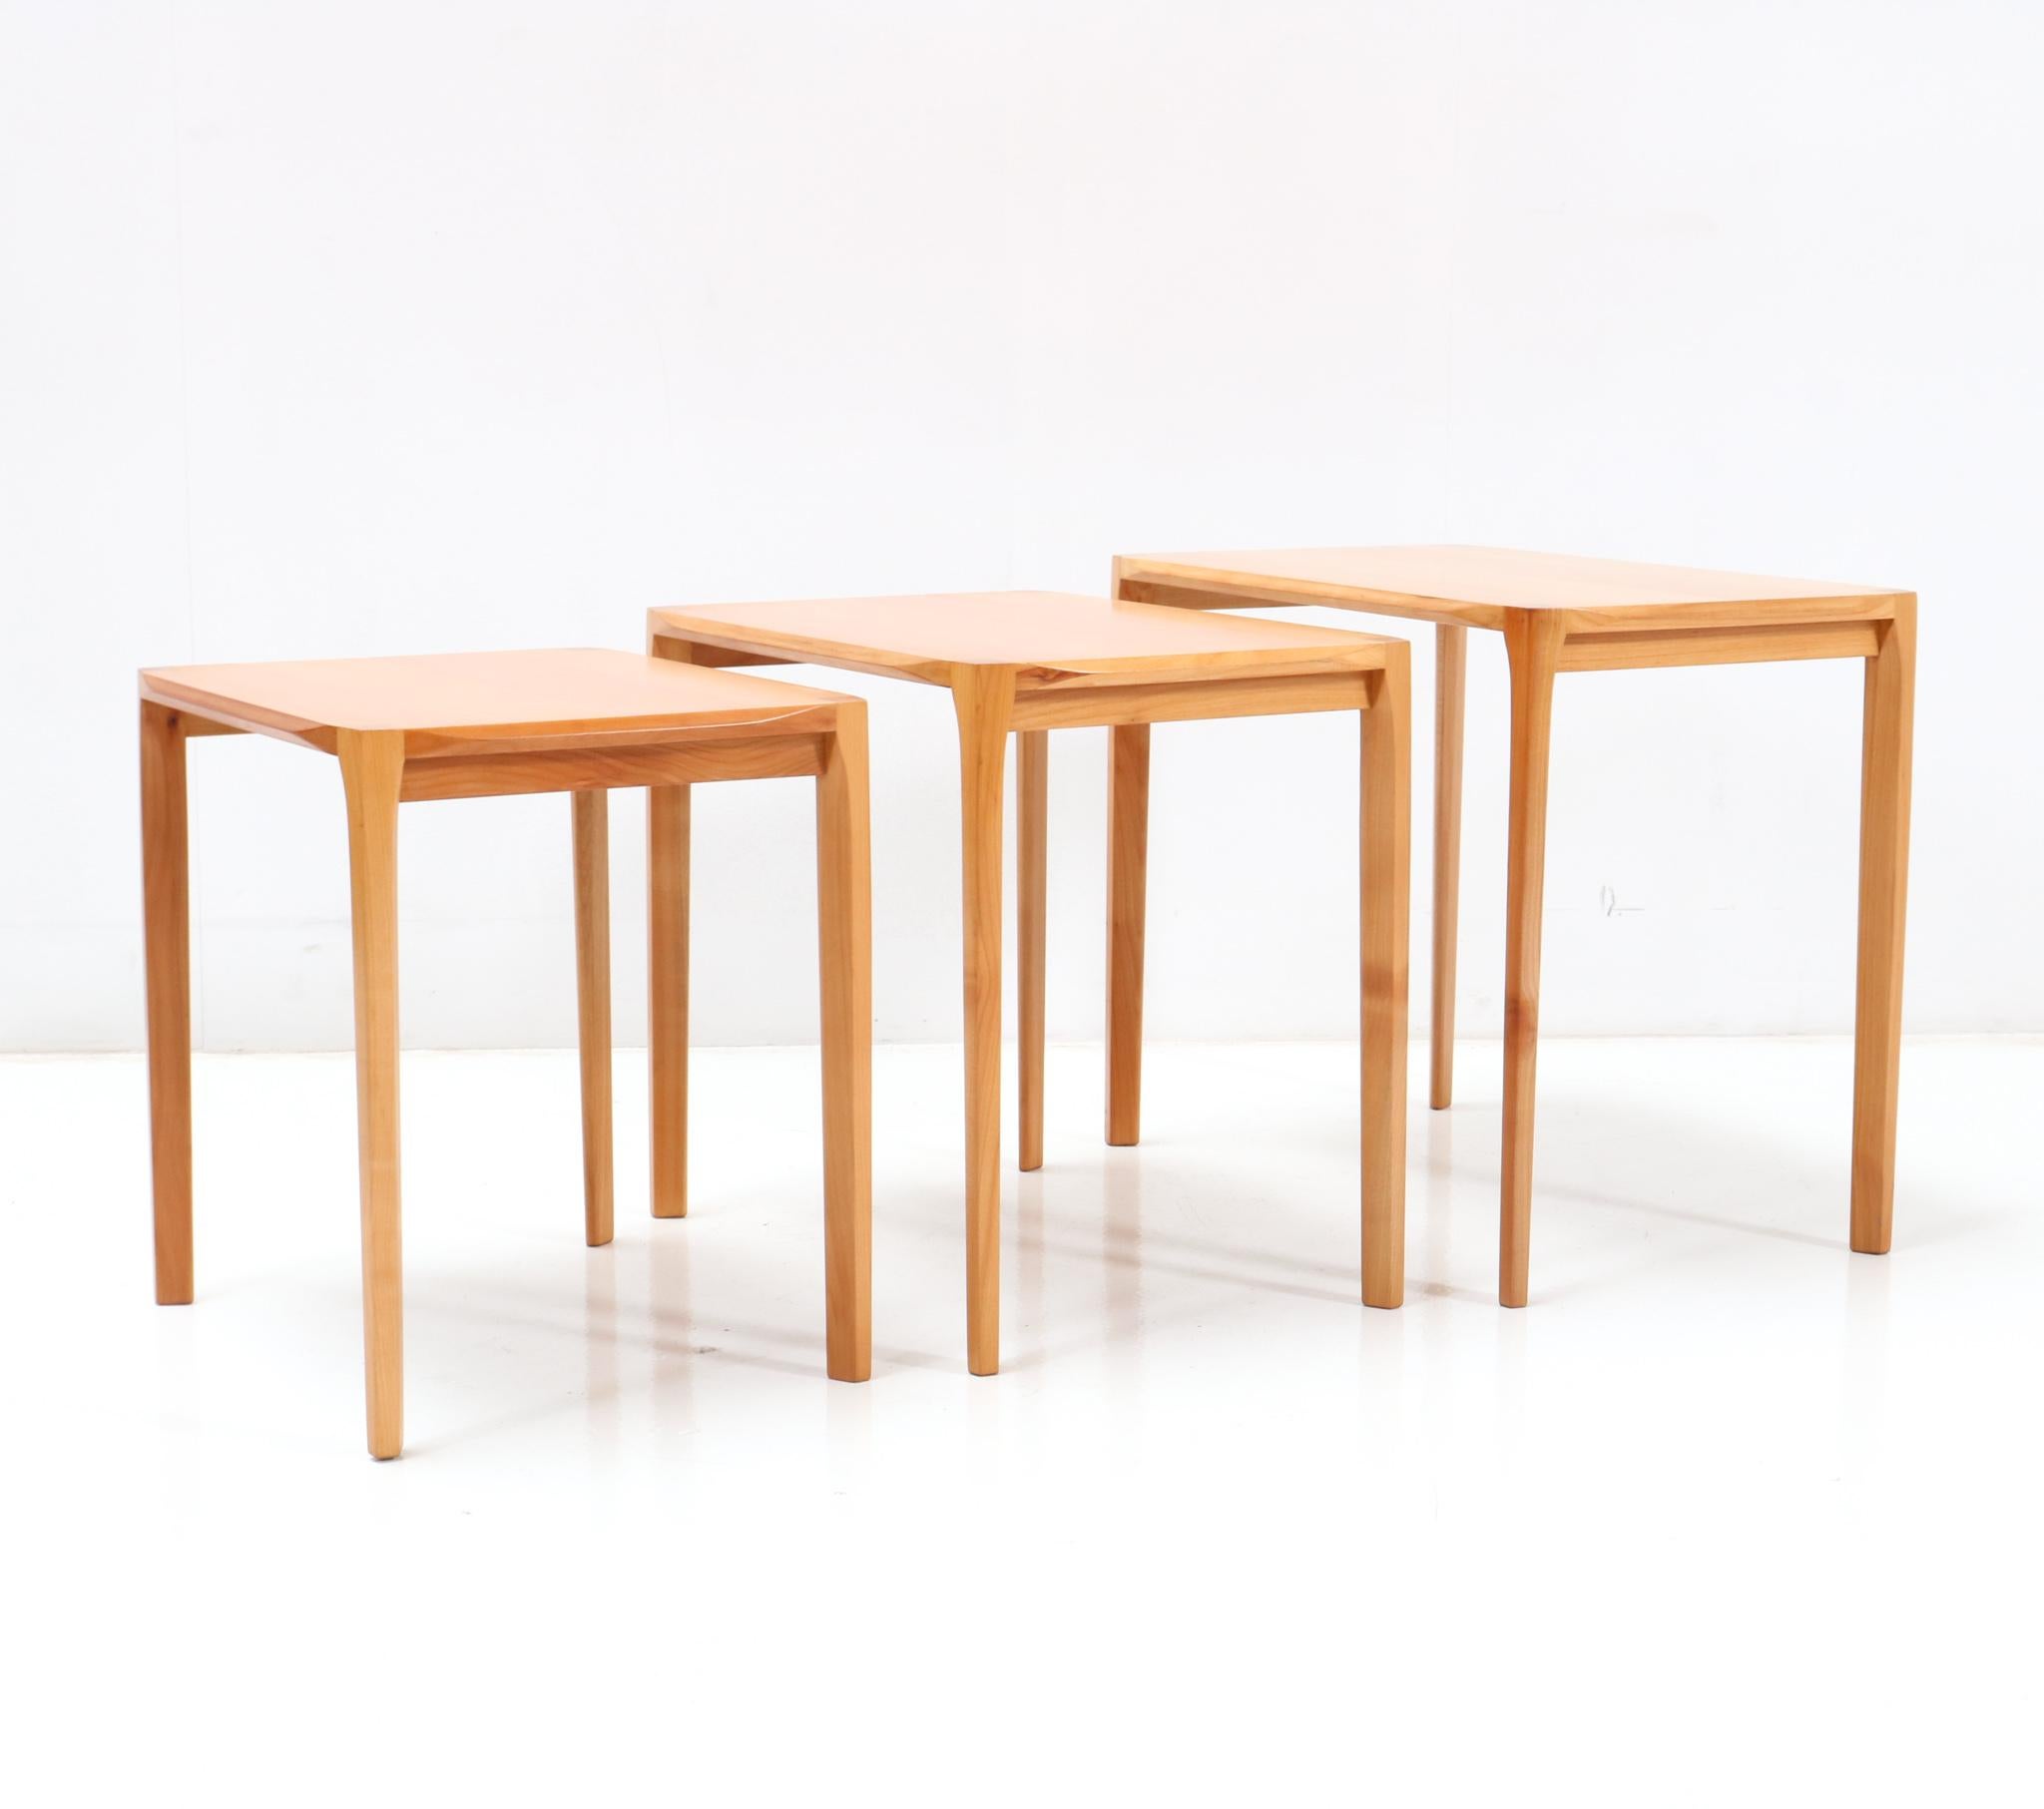 Mid-20th Century Cherry Mid-Century Modern Nesting Tables by Rex Raab for Wilhelm Renz, 1960s